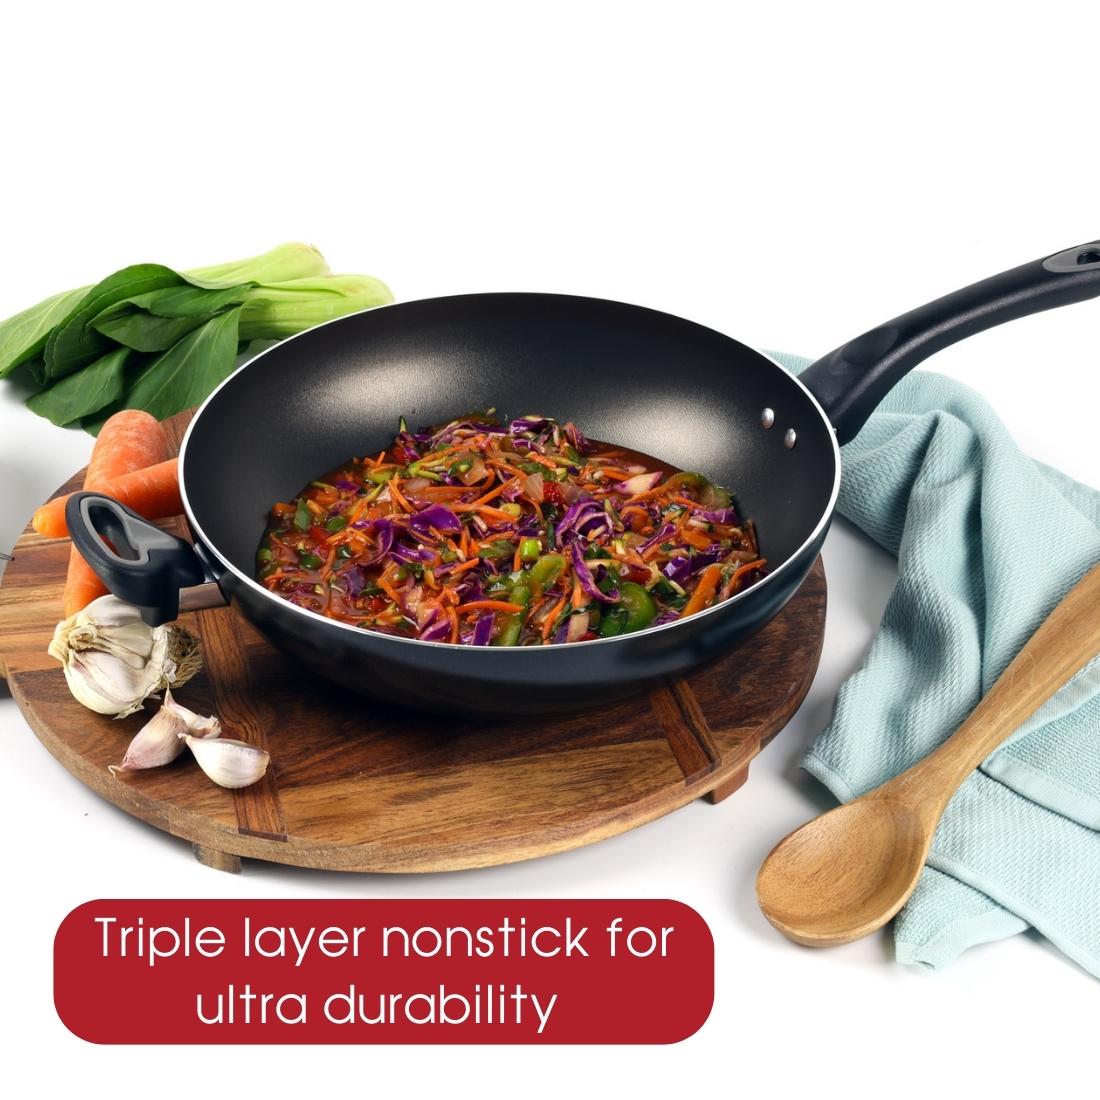 RACO Complete Nonstick Induction Open Stirfry 30cm